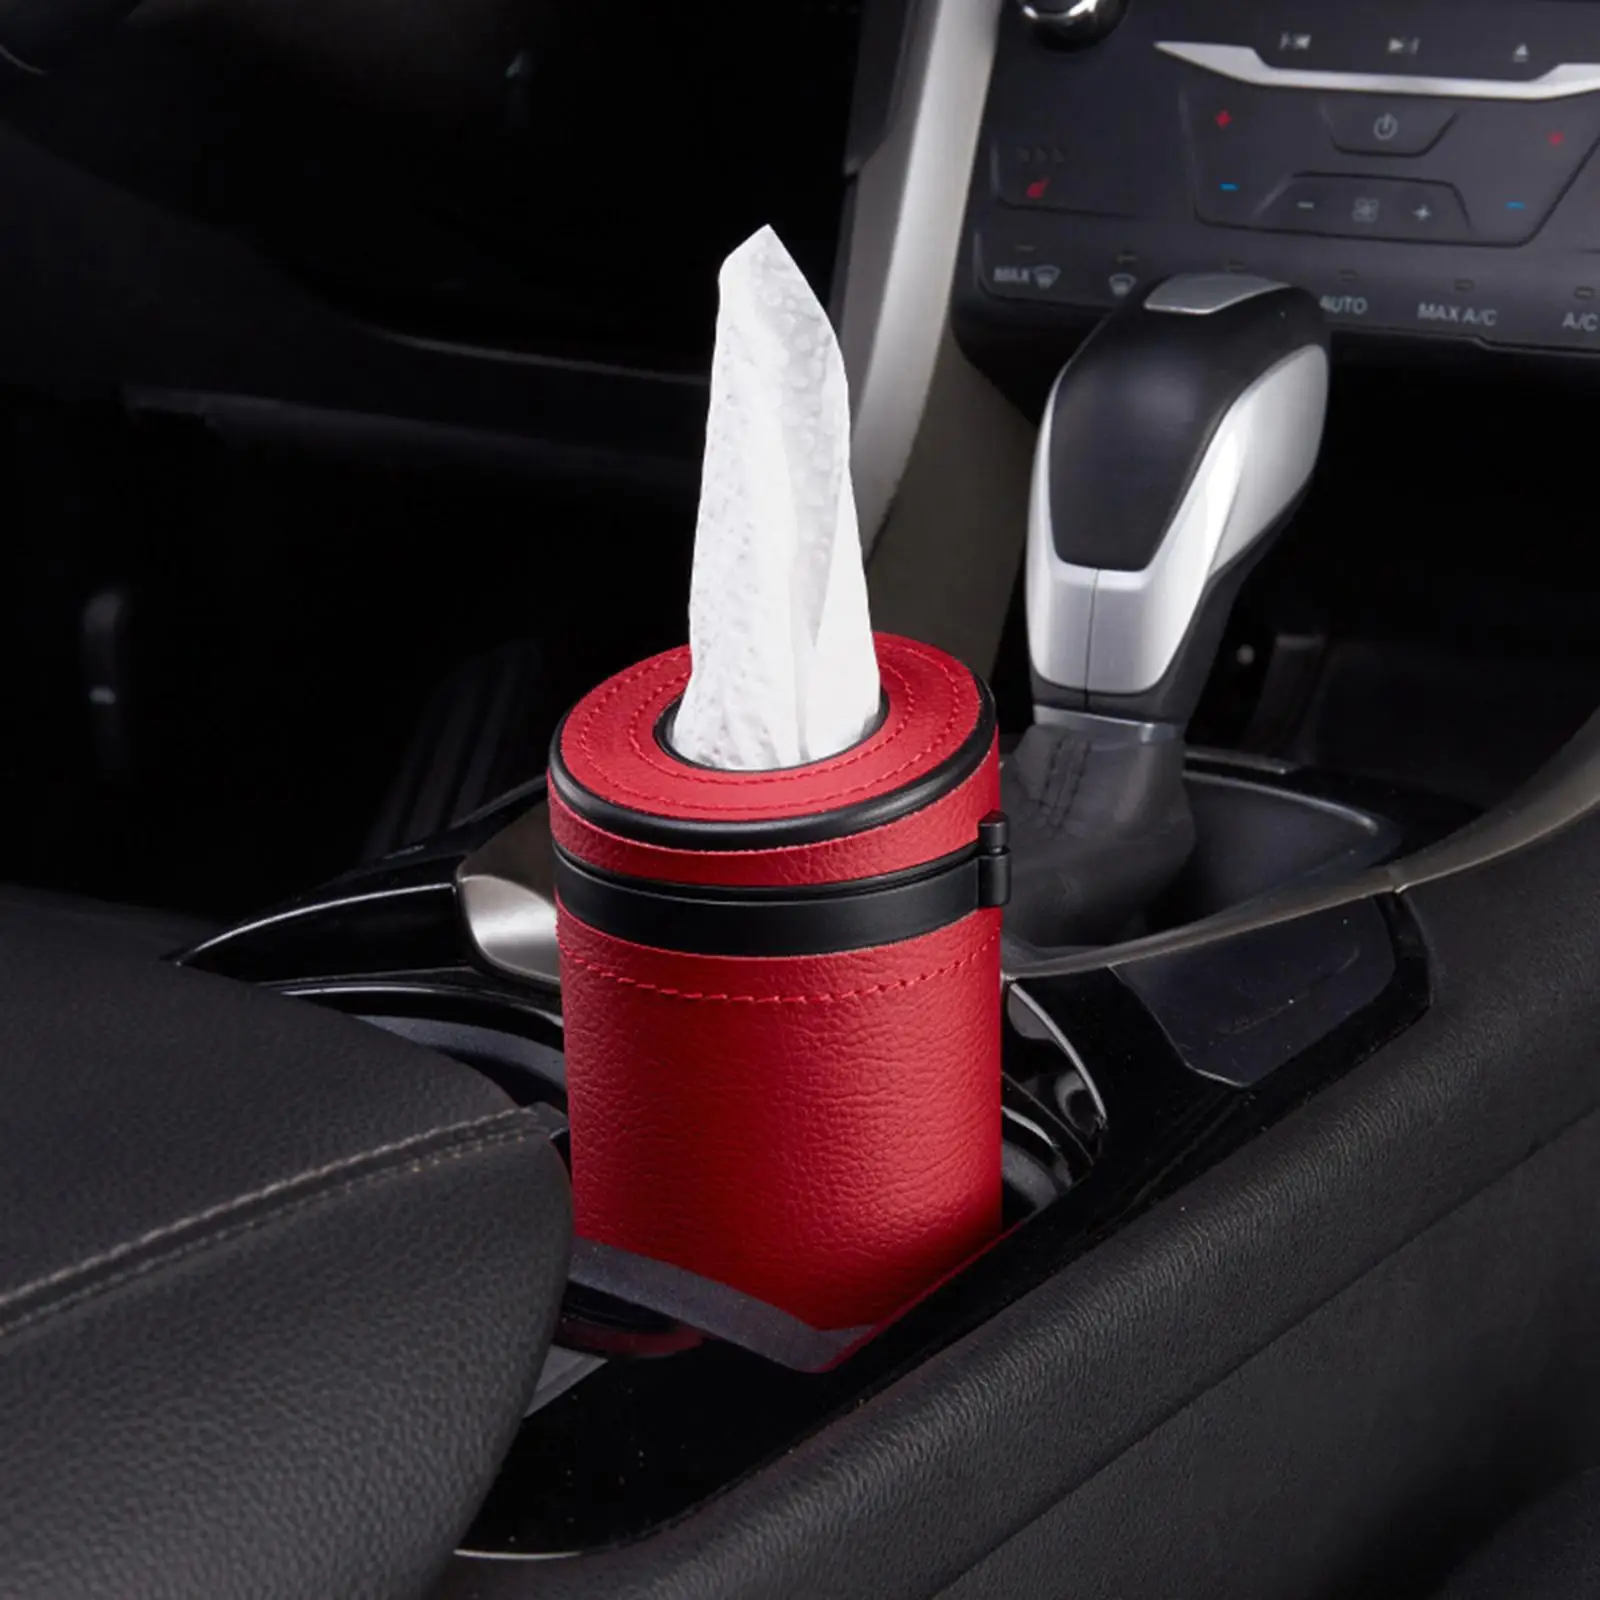 Cylinder Car Tissues Box Travel Facial Tissues Box Tissues Container for Car Cup Holder Tissue Tube Safety Broken Window